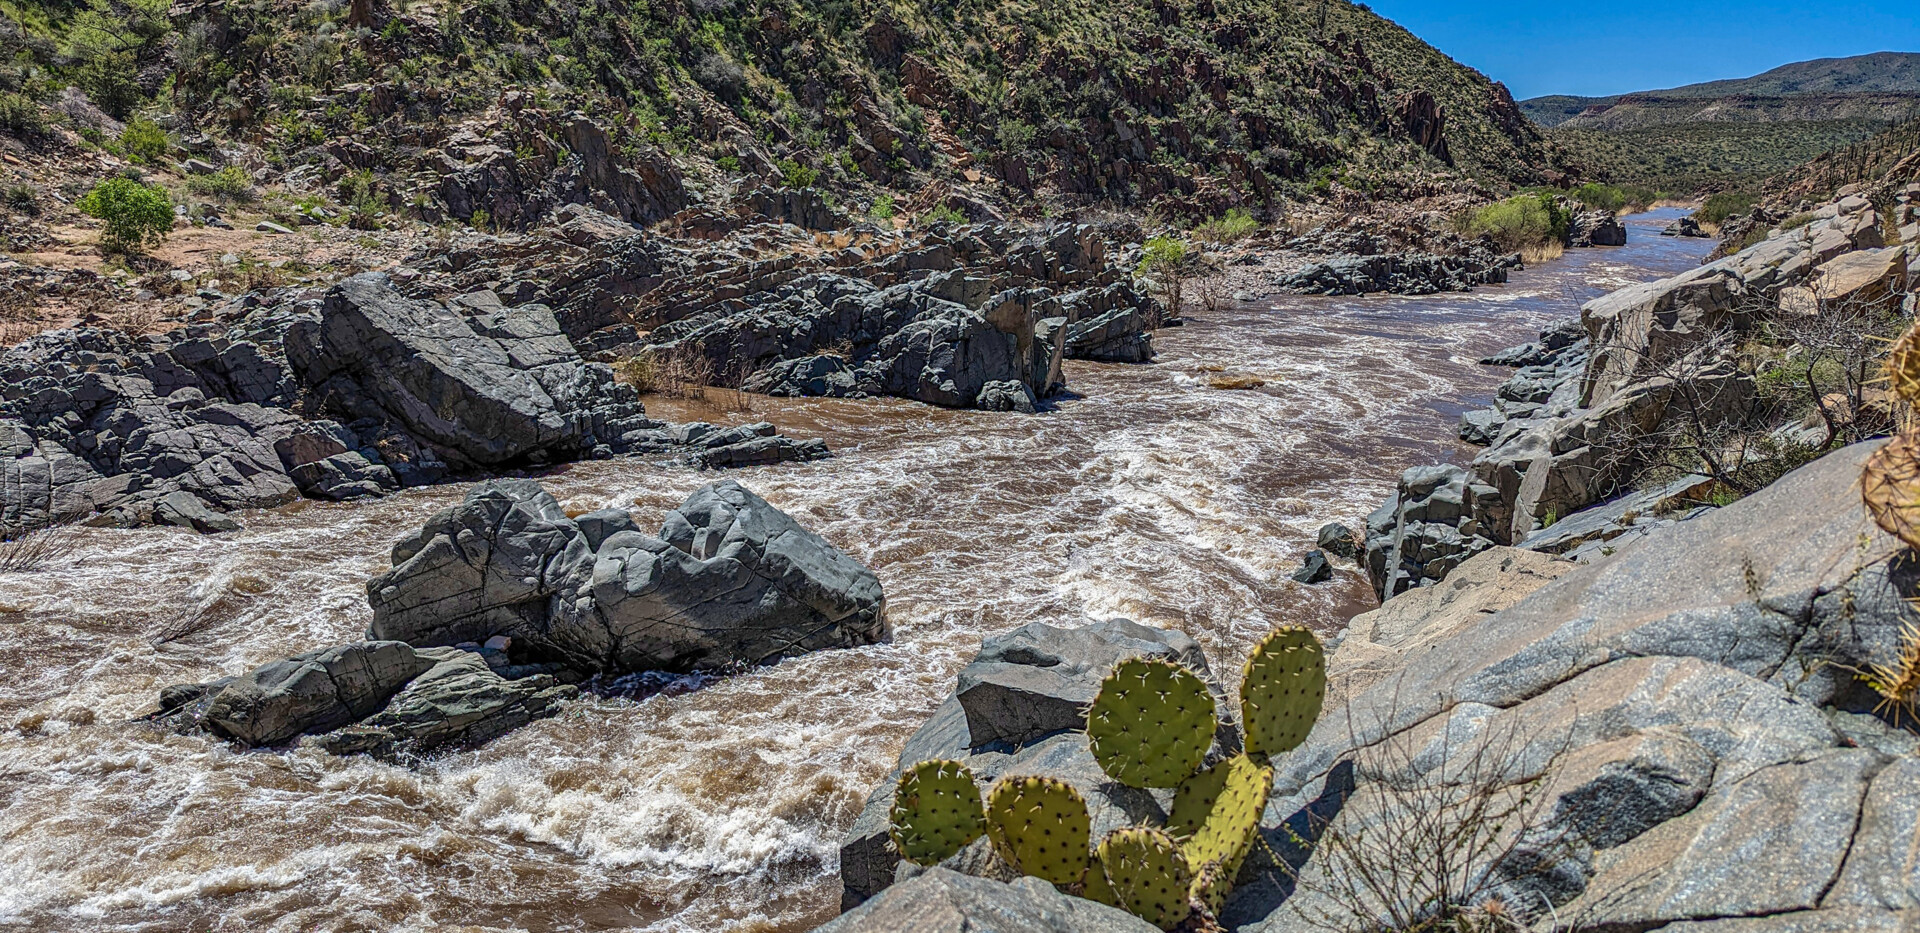 Salt River Rafting - whitewater and cactus - Photo: Pete Wallstrom